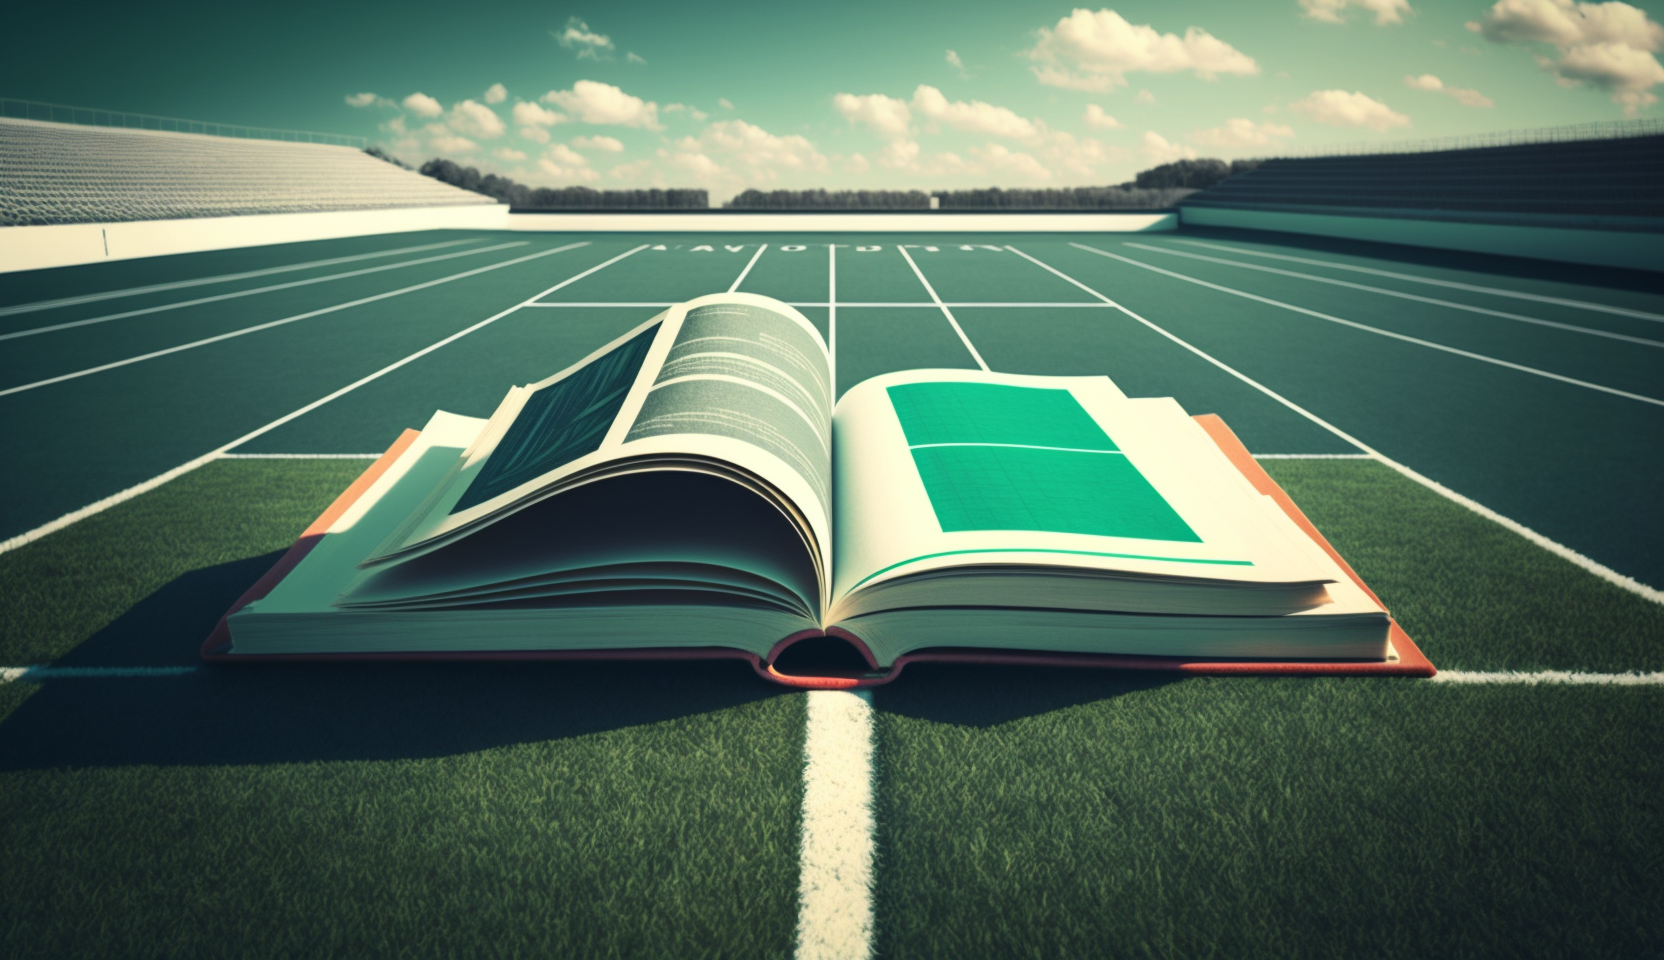 A historical book on a sports fields filled with memorable sports moments.